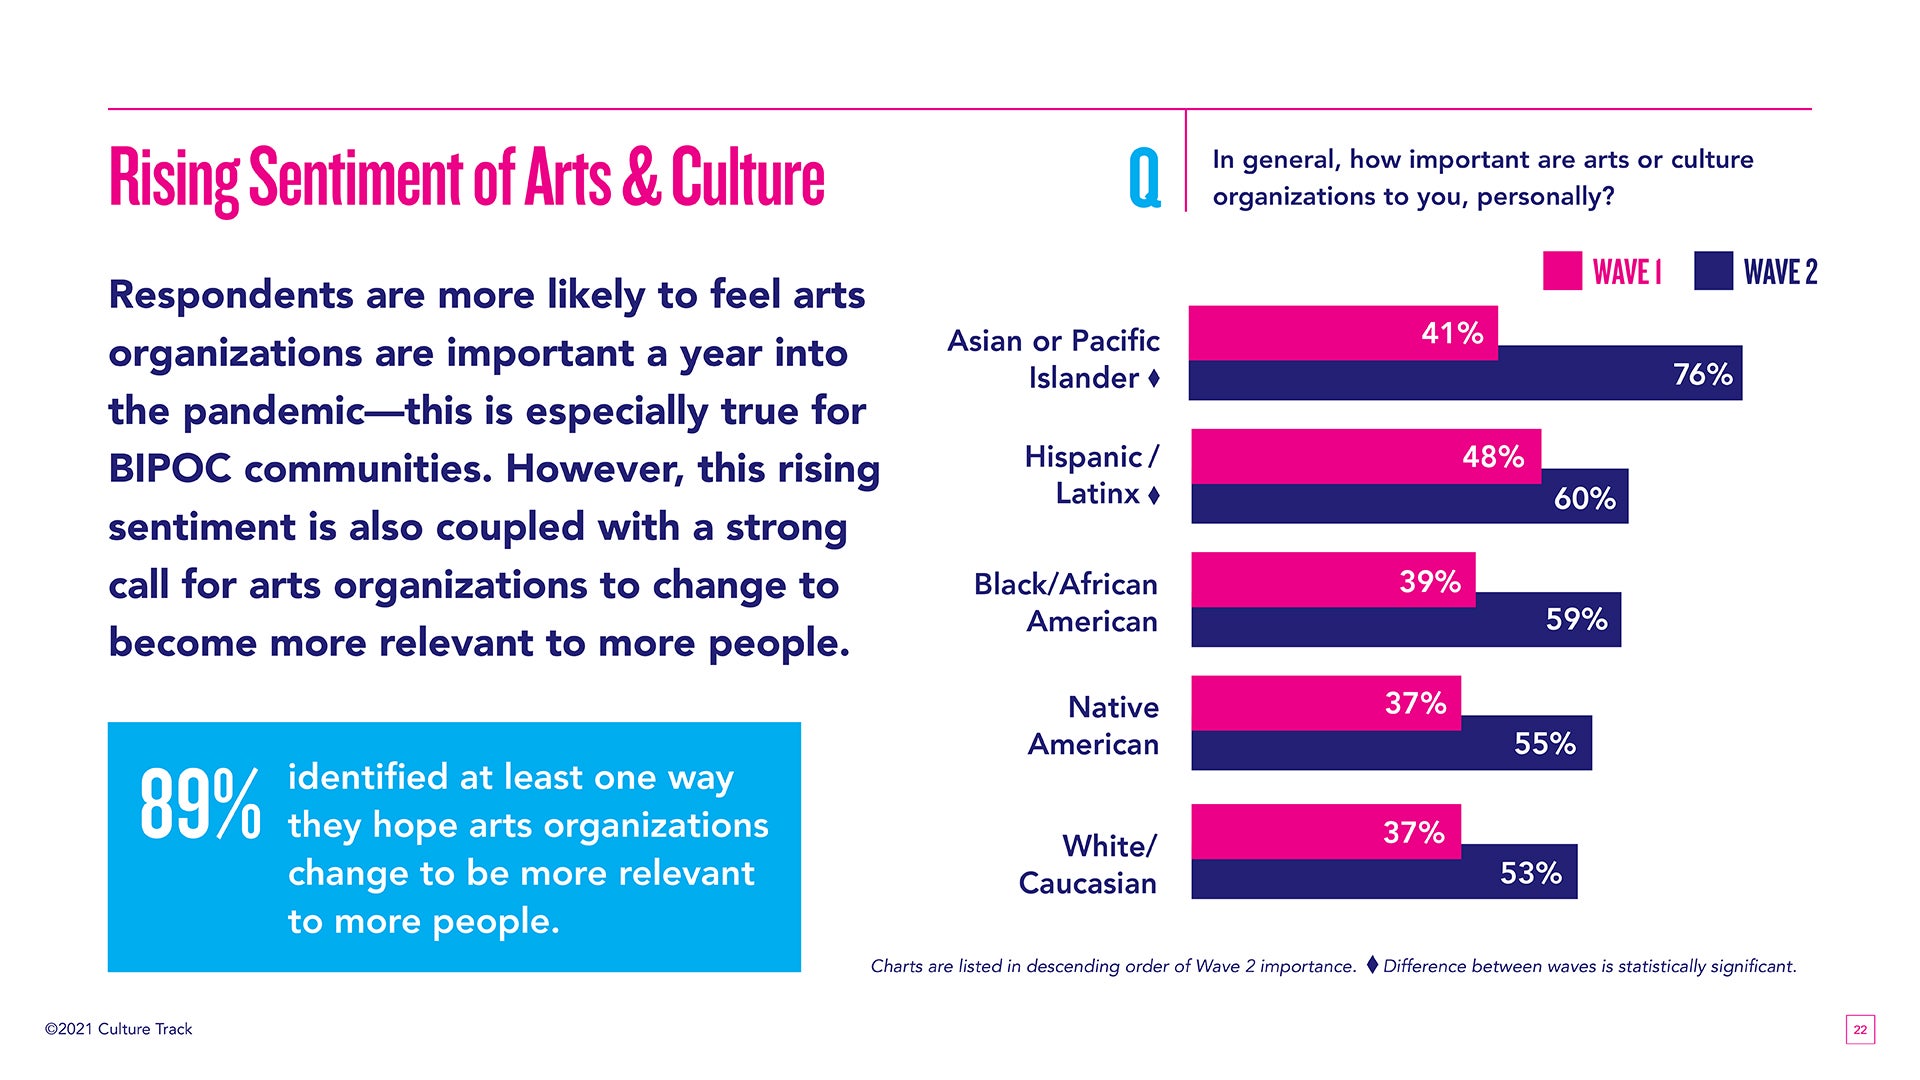 89% identified at least one way they hope arts organizations change to be more relevant to more people.